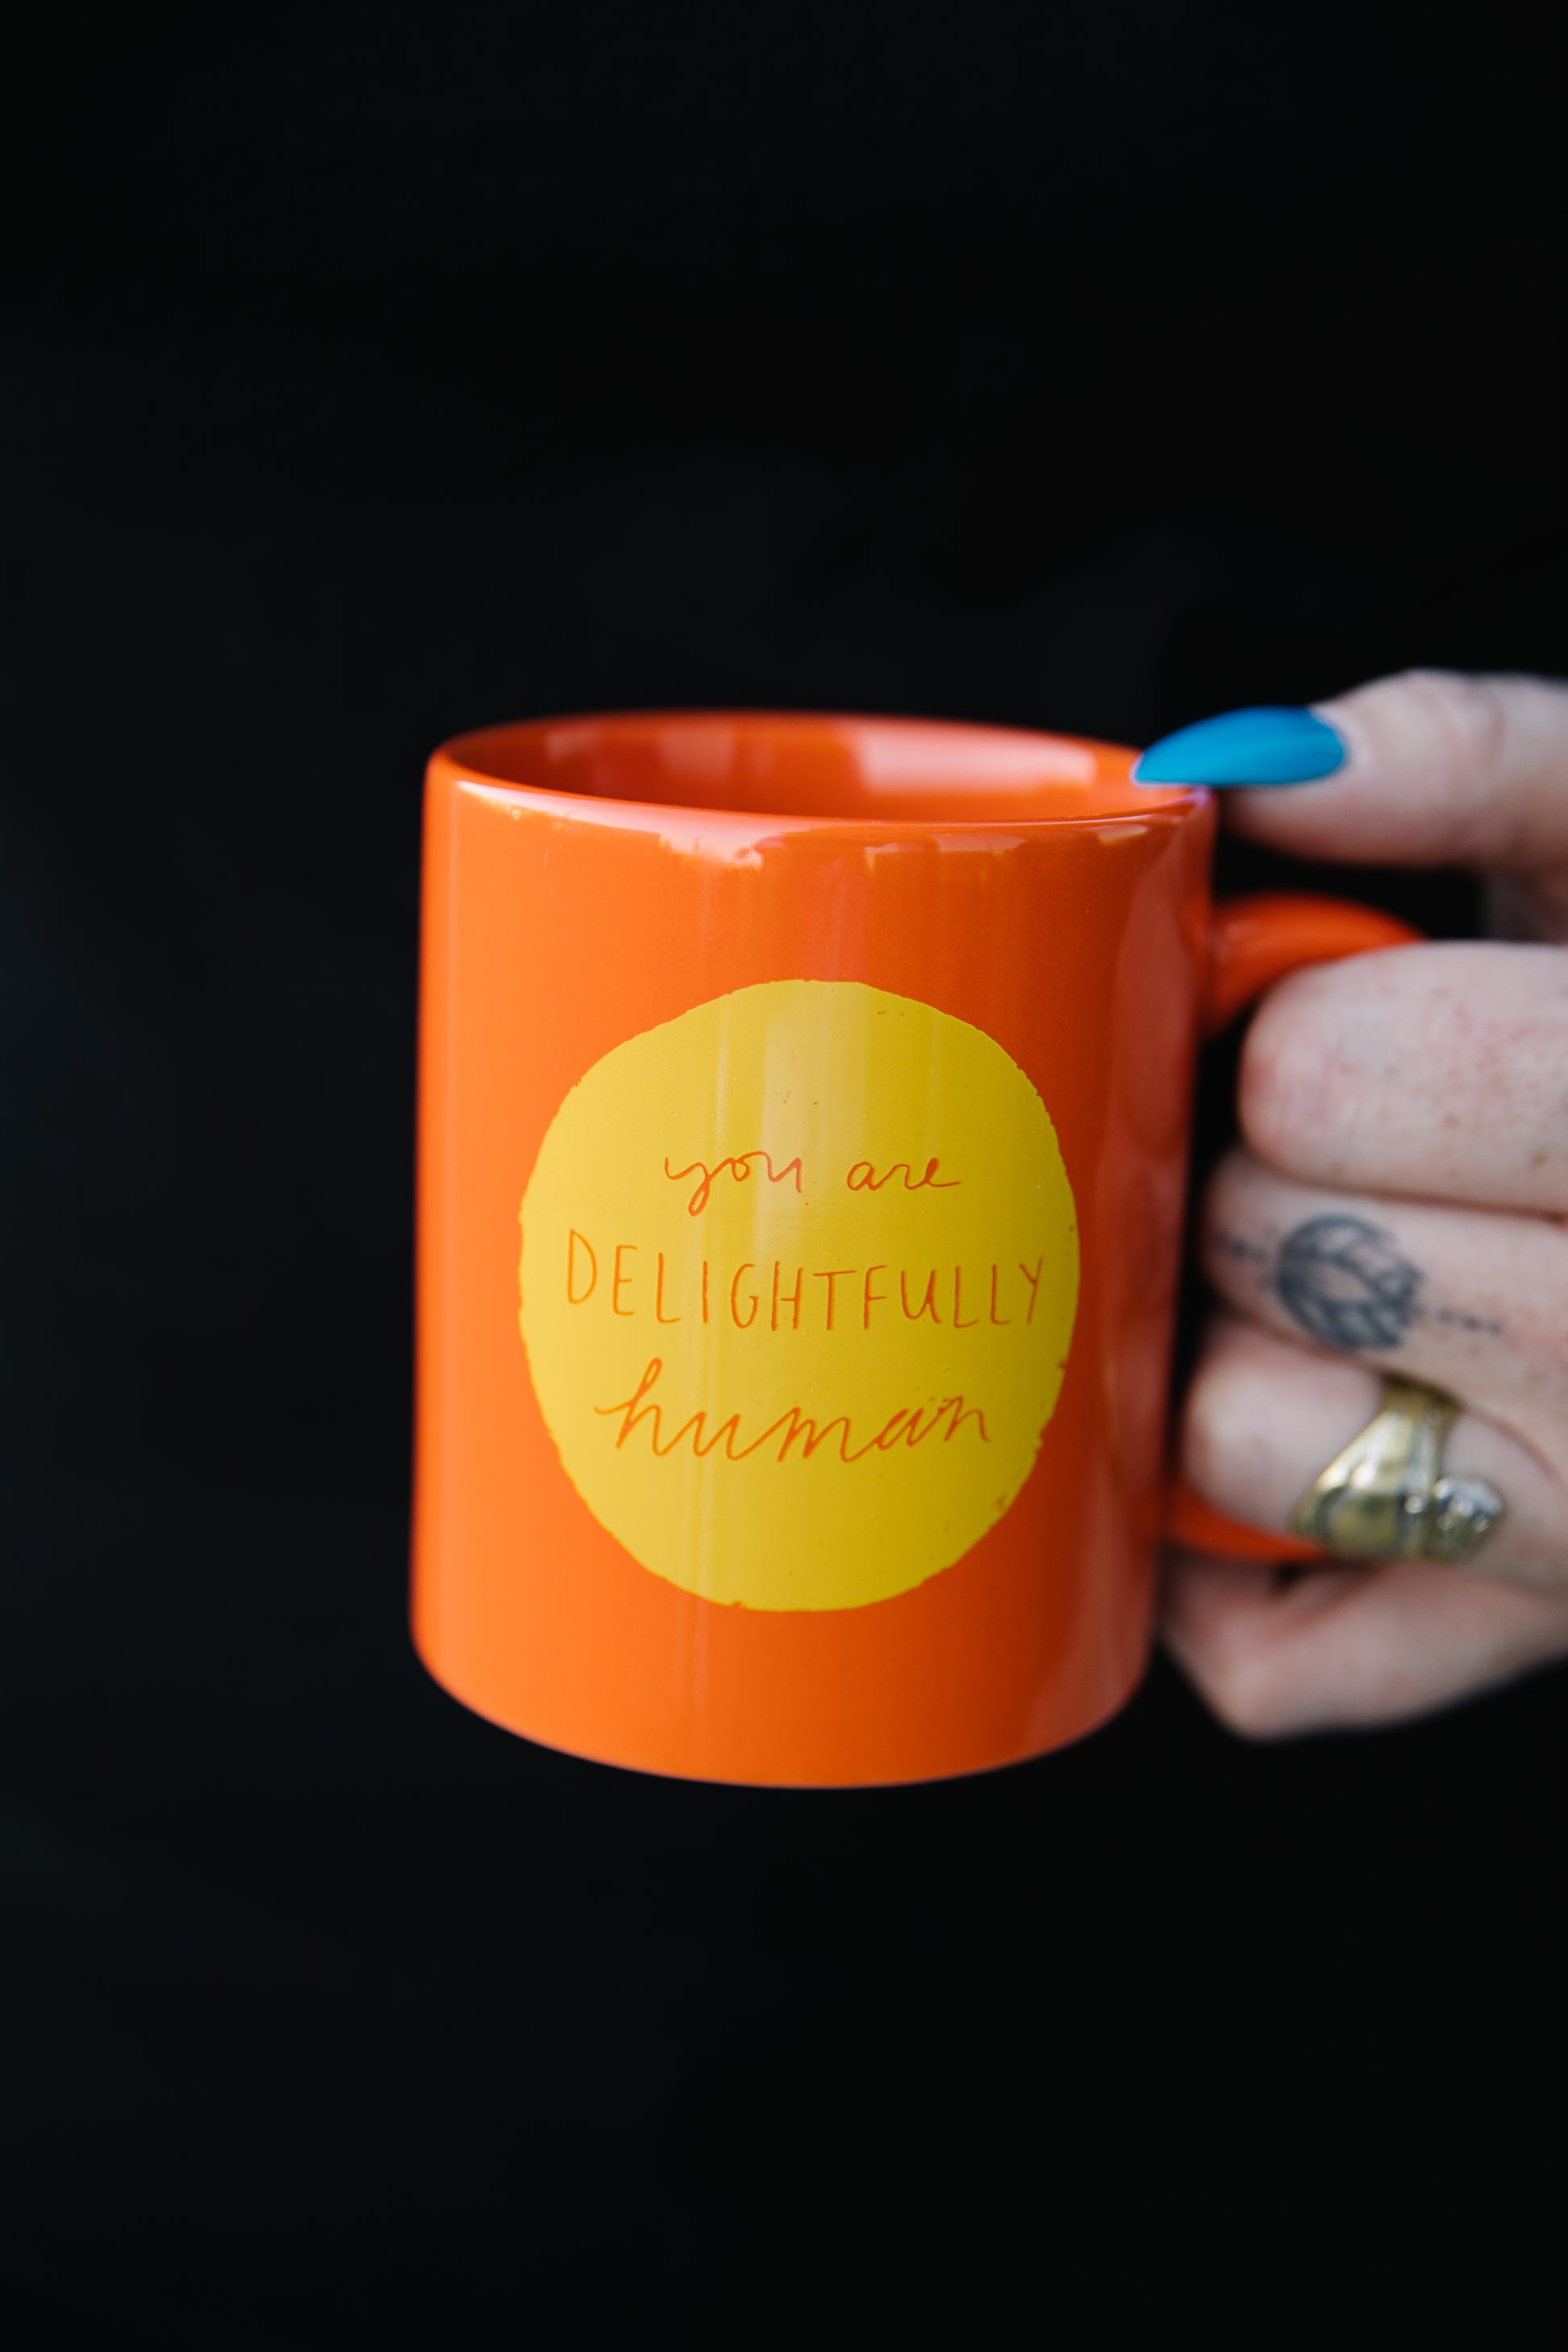 Hands holding a bright orange mug with a yellow circle in the center of the mug that says "you are delightfully human"